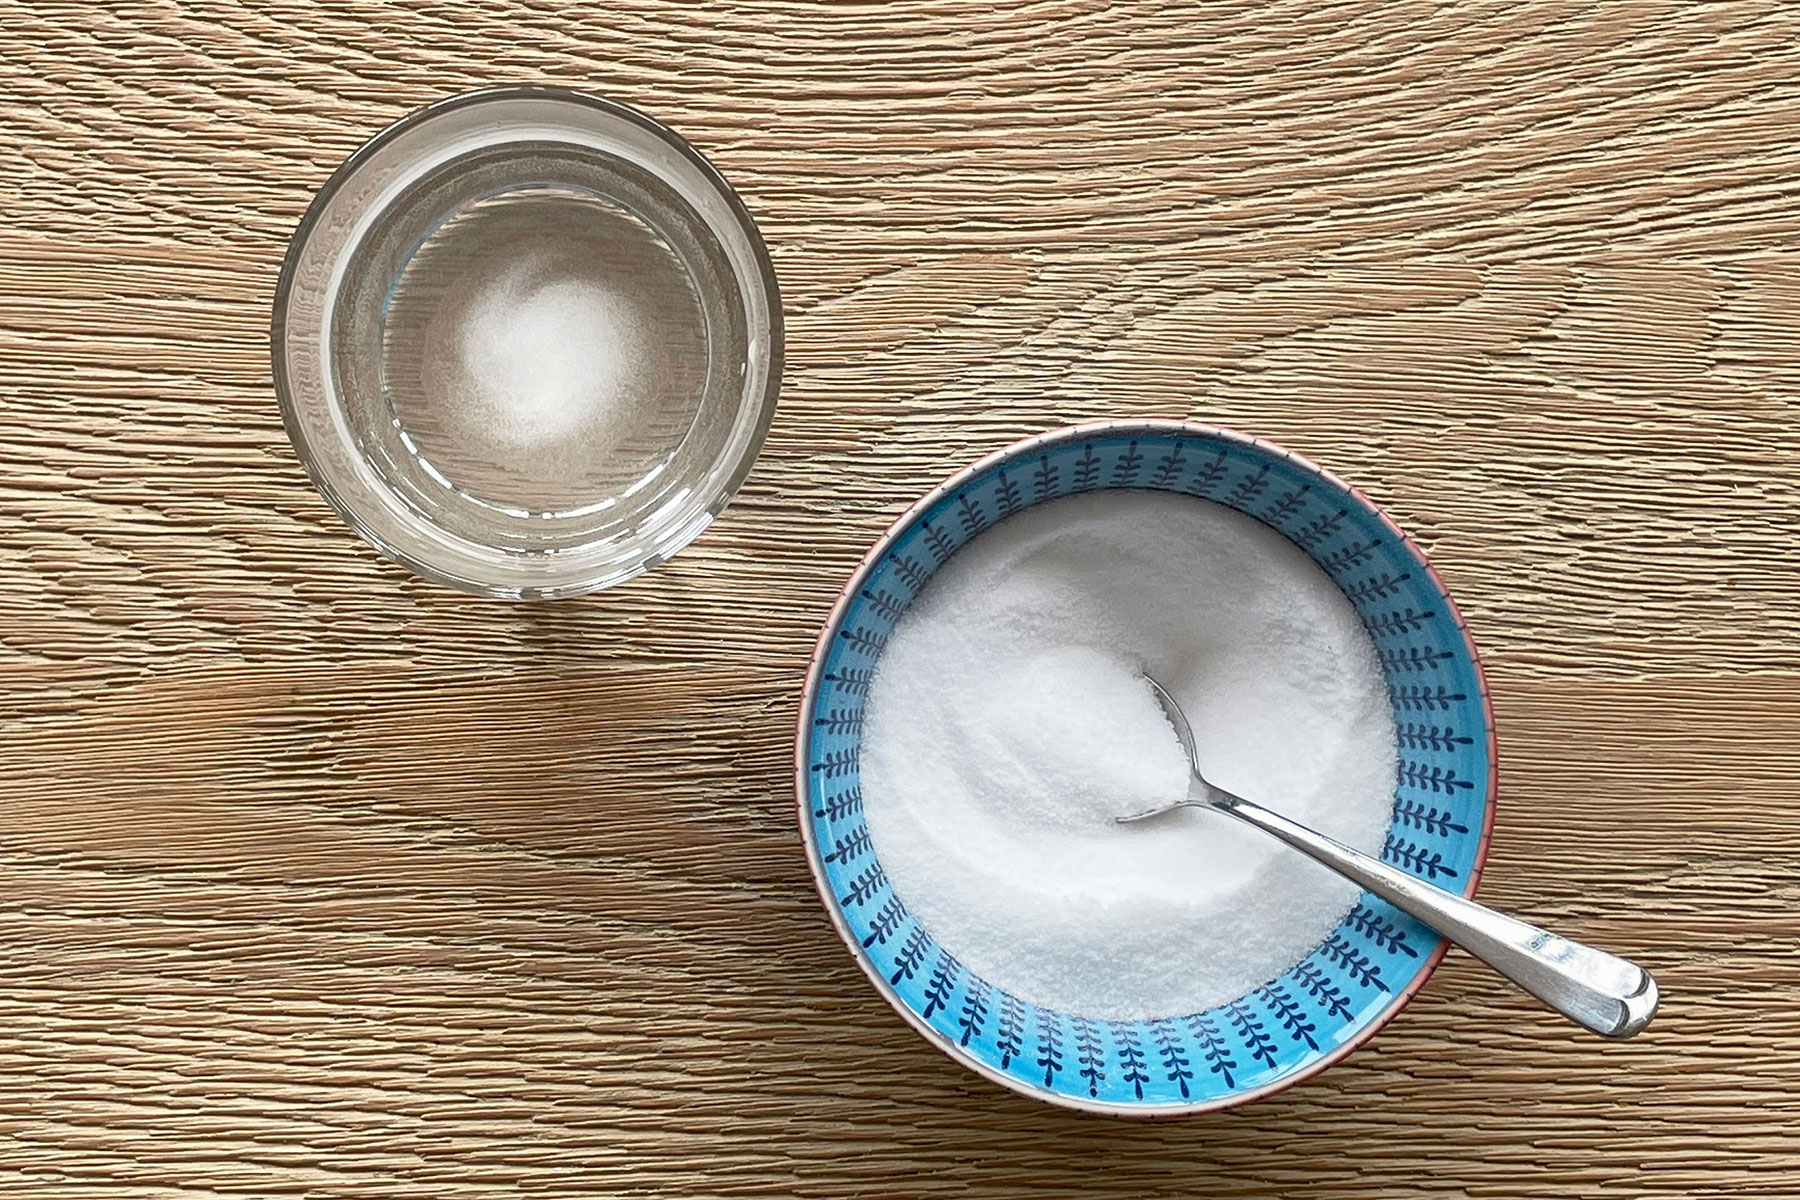 A photo of a bowl of salt with a spoon in it next to a cup of hot water